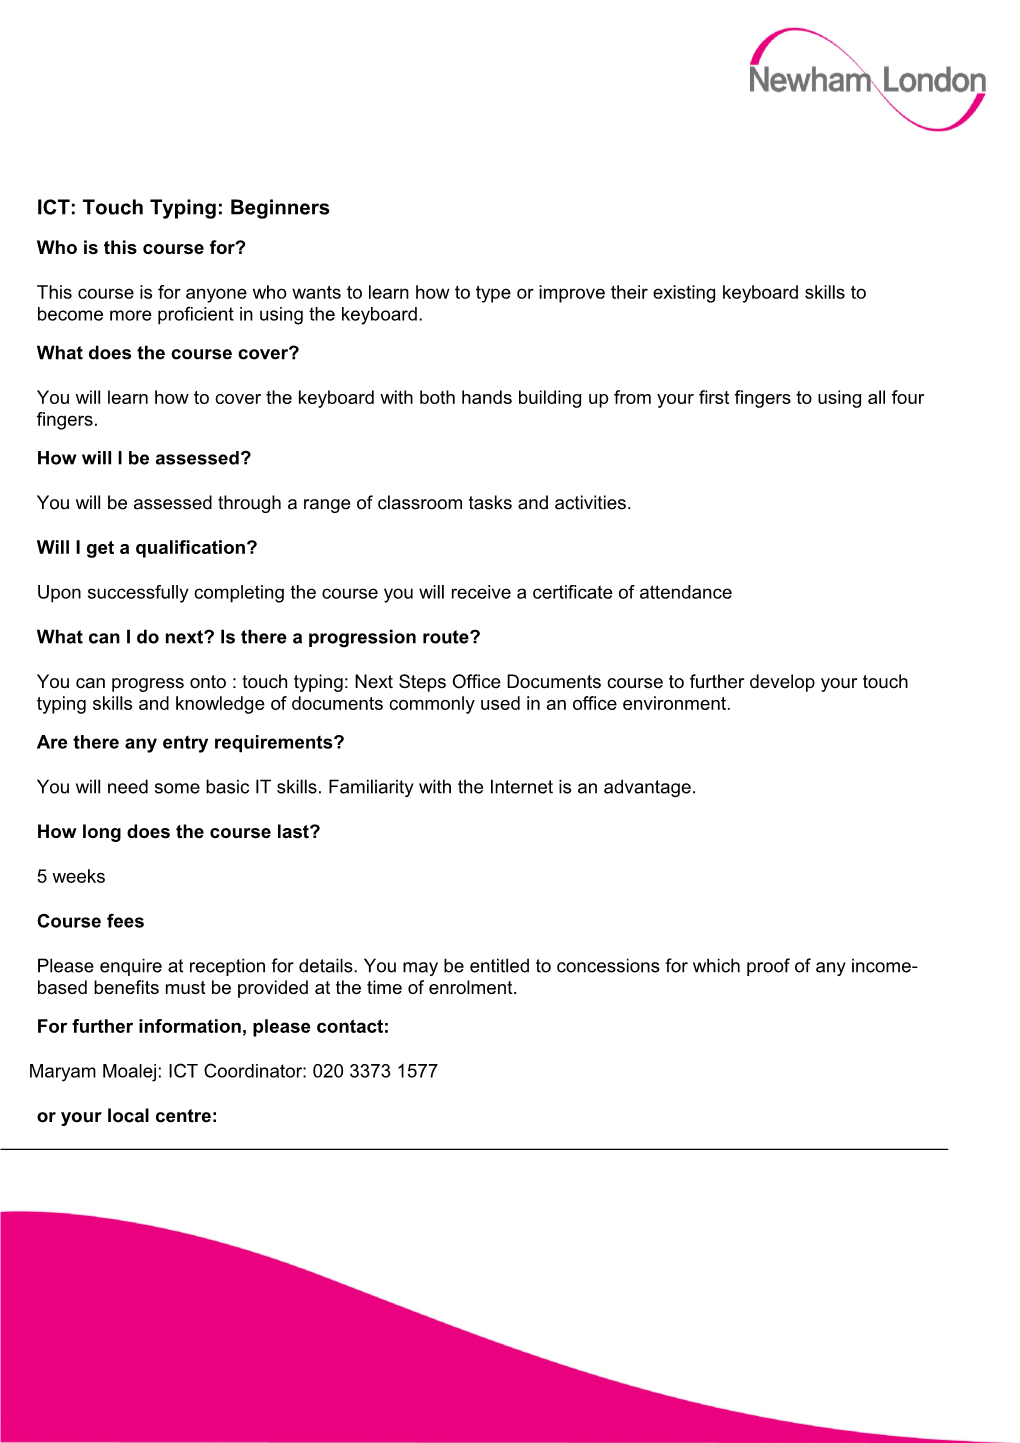 Newham Adult Learning Service - Course Information Sheet